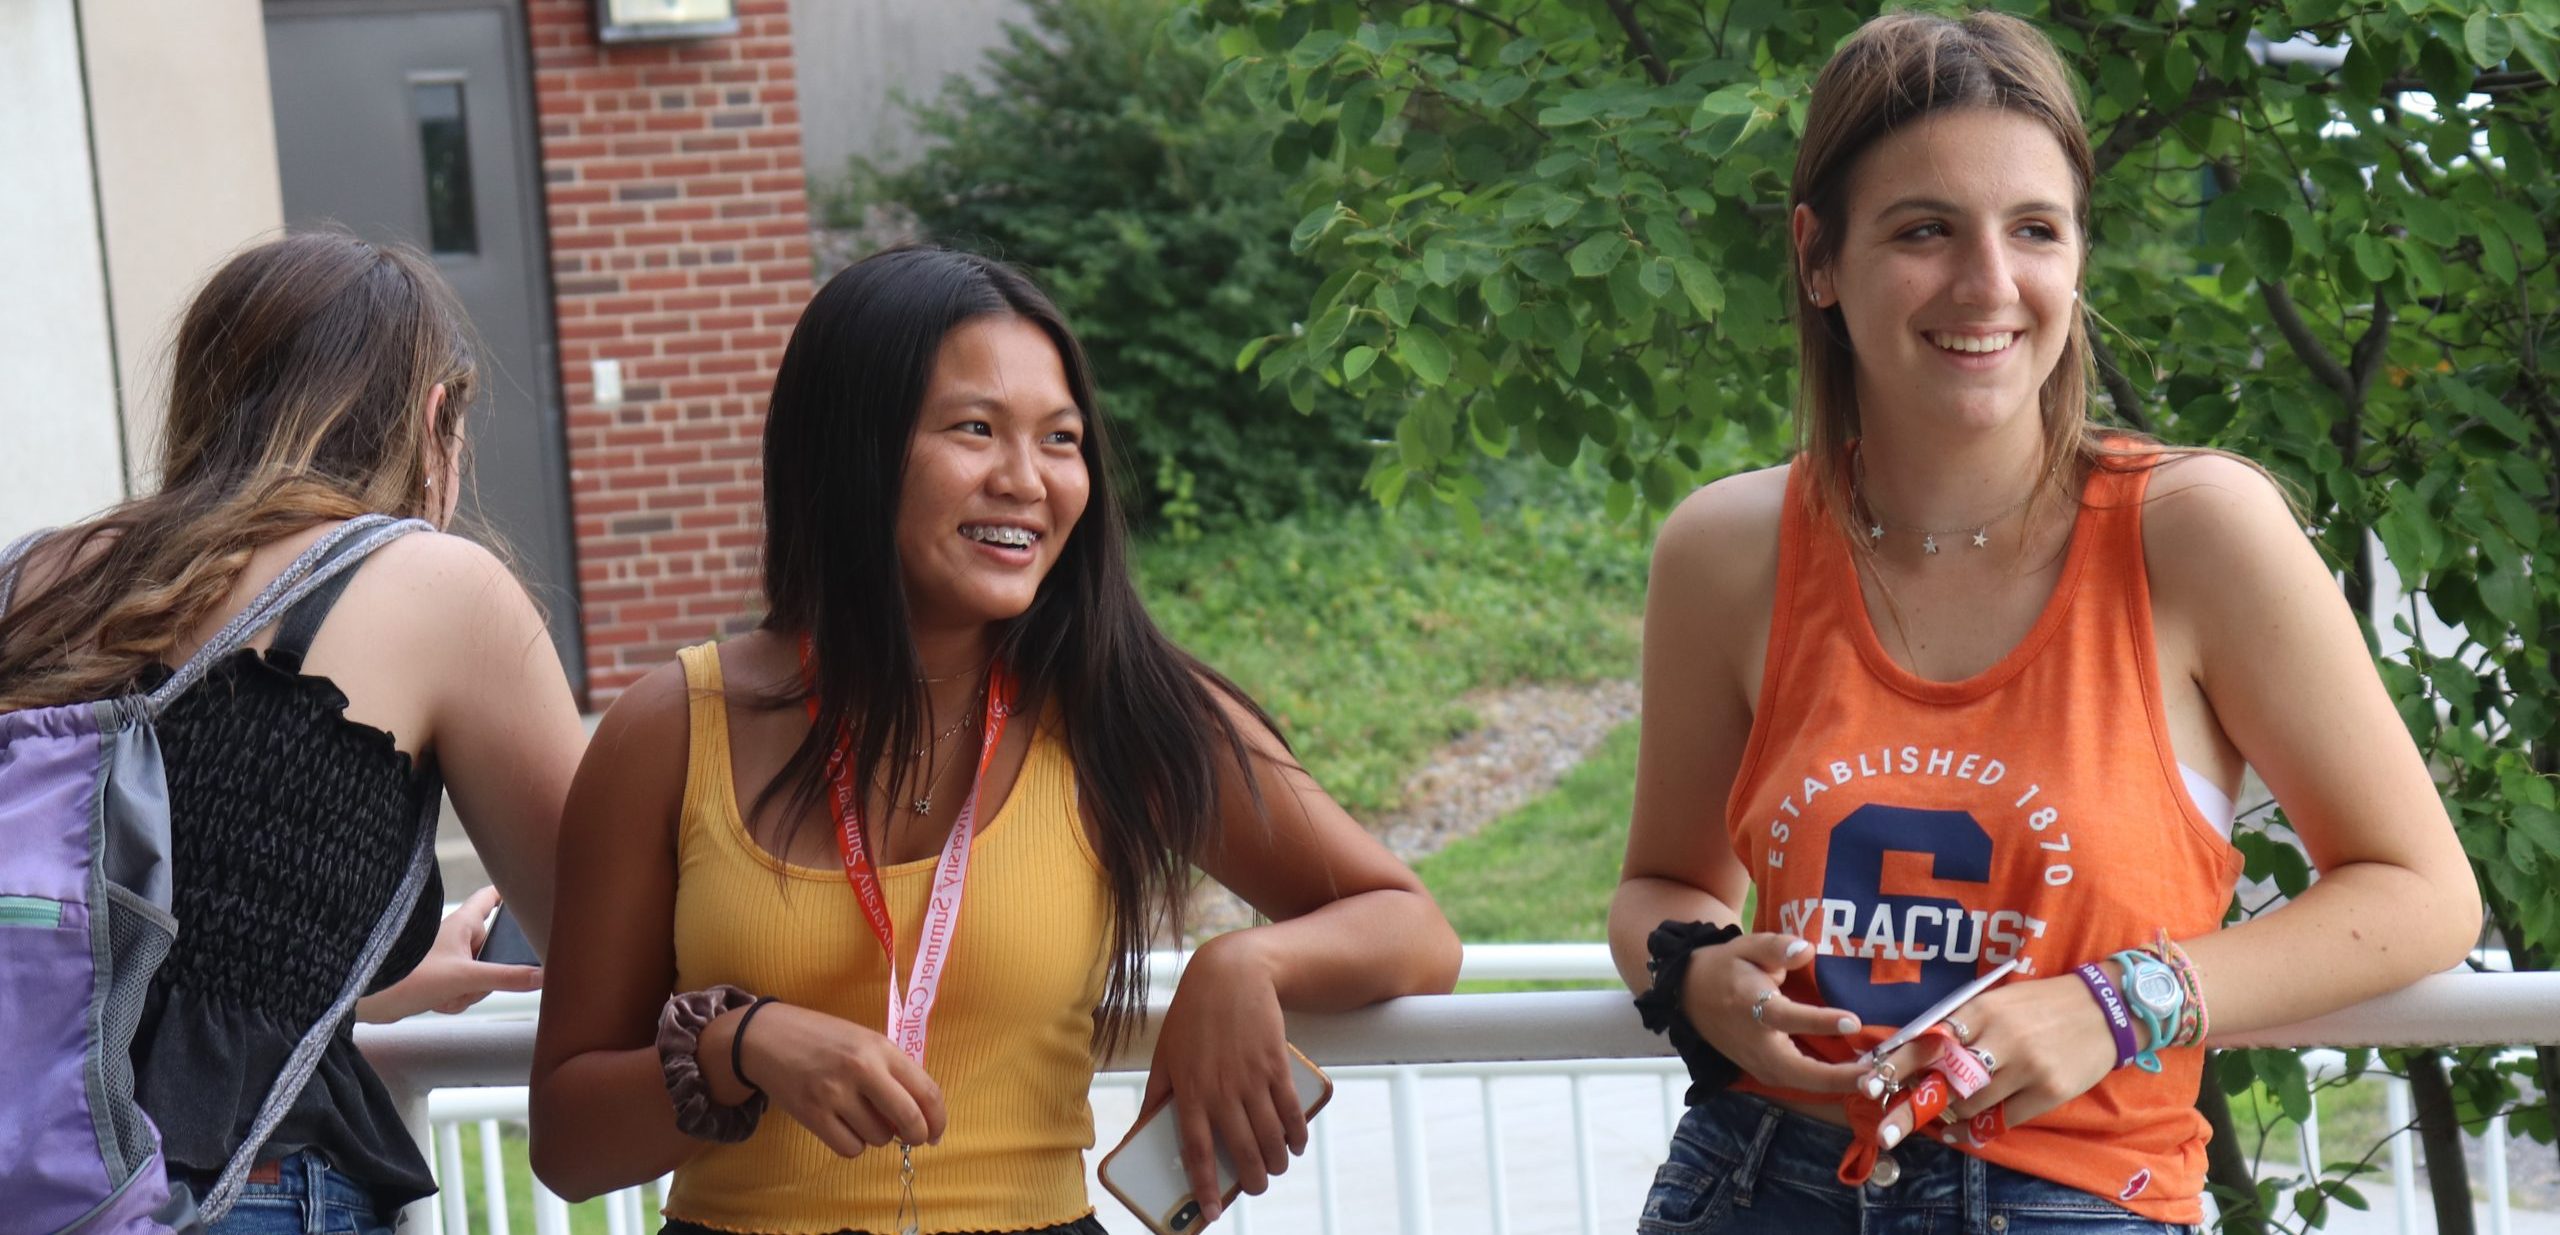 Two high school students wearing Syracuse University shirts and lanyards laugh together.